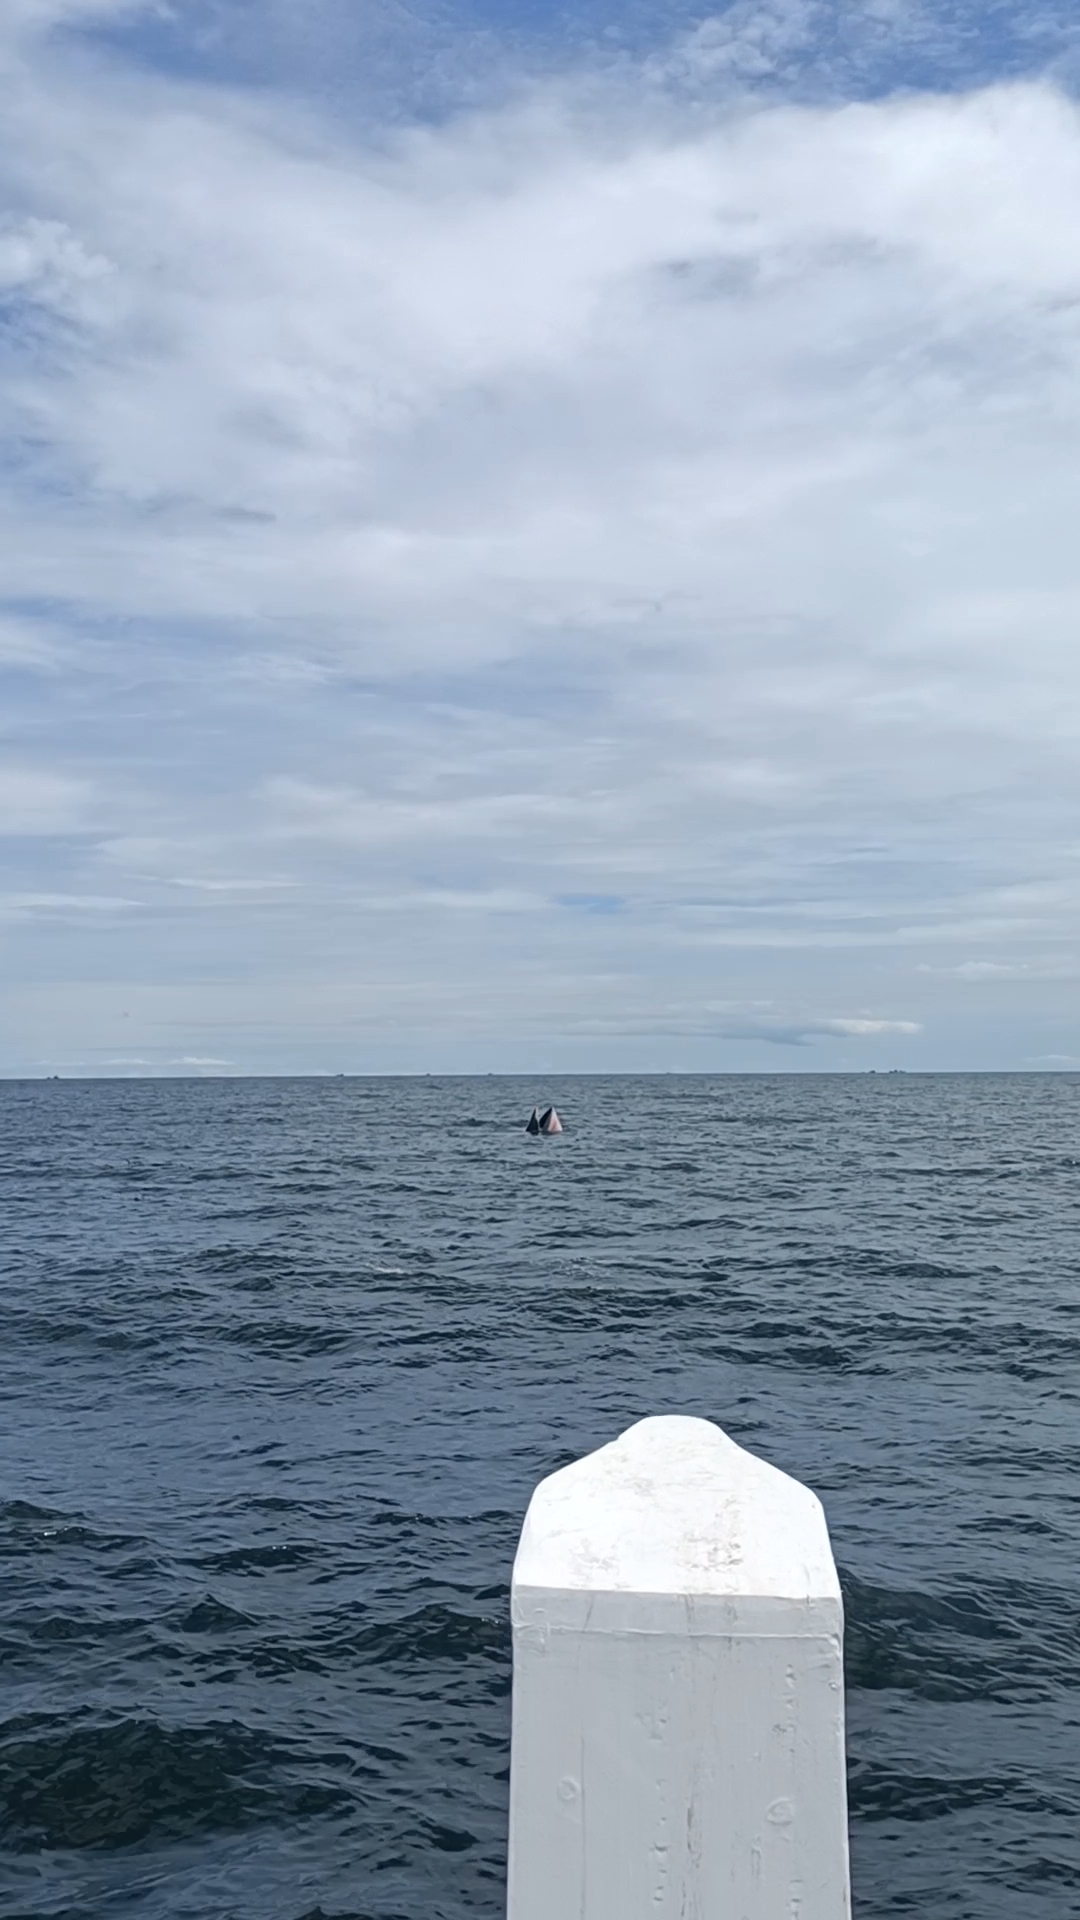 Bryde whale feeding seen from a boat